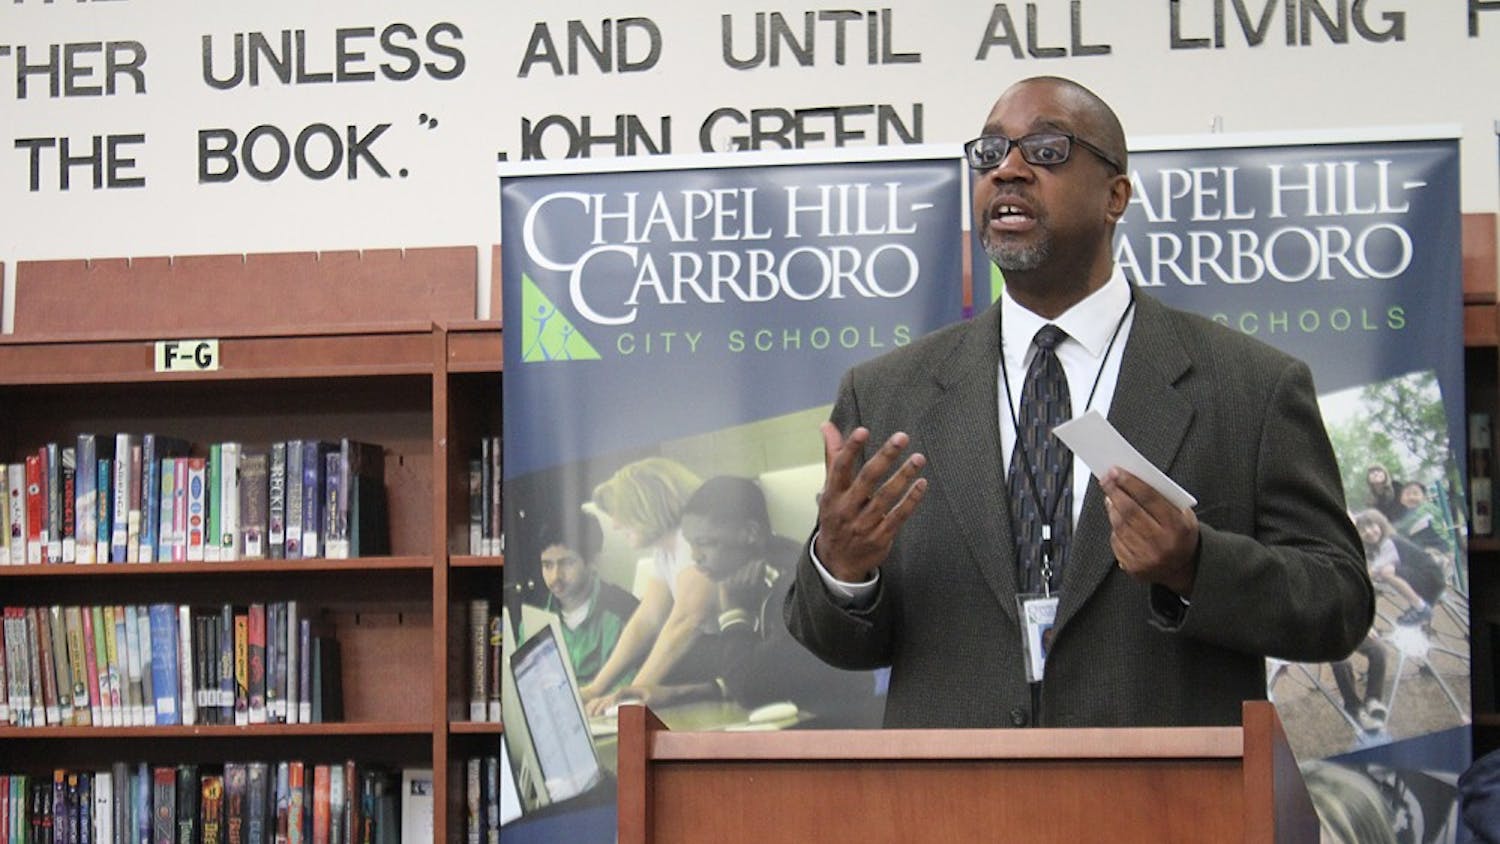 Darren Bell, creator of Chapel Hill Carrboro City School's Community Connection Program speaks at Smith Middle School on Feb. 5.